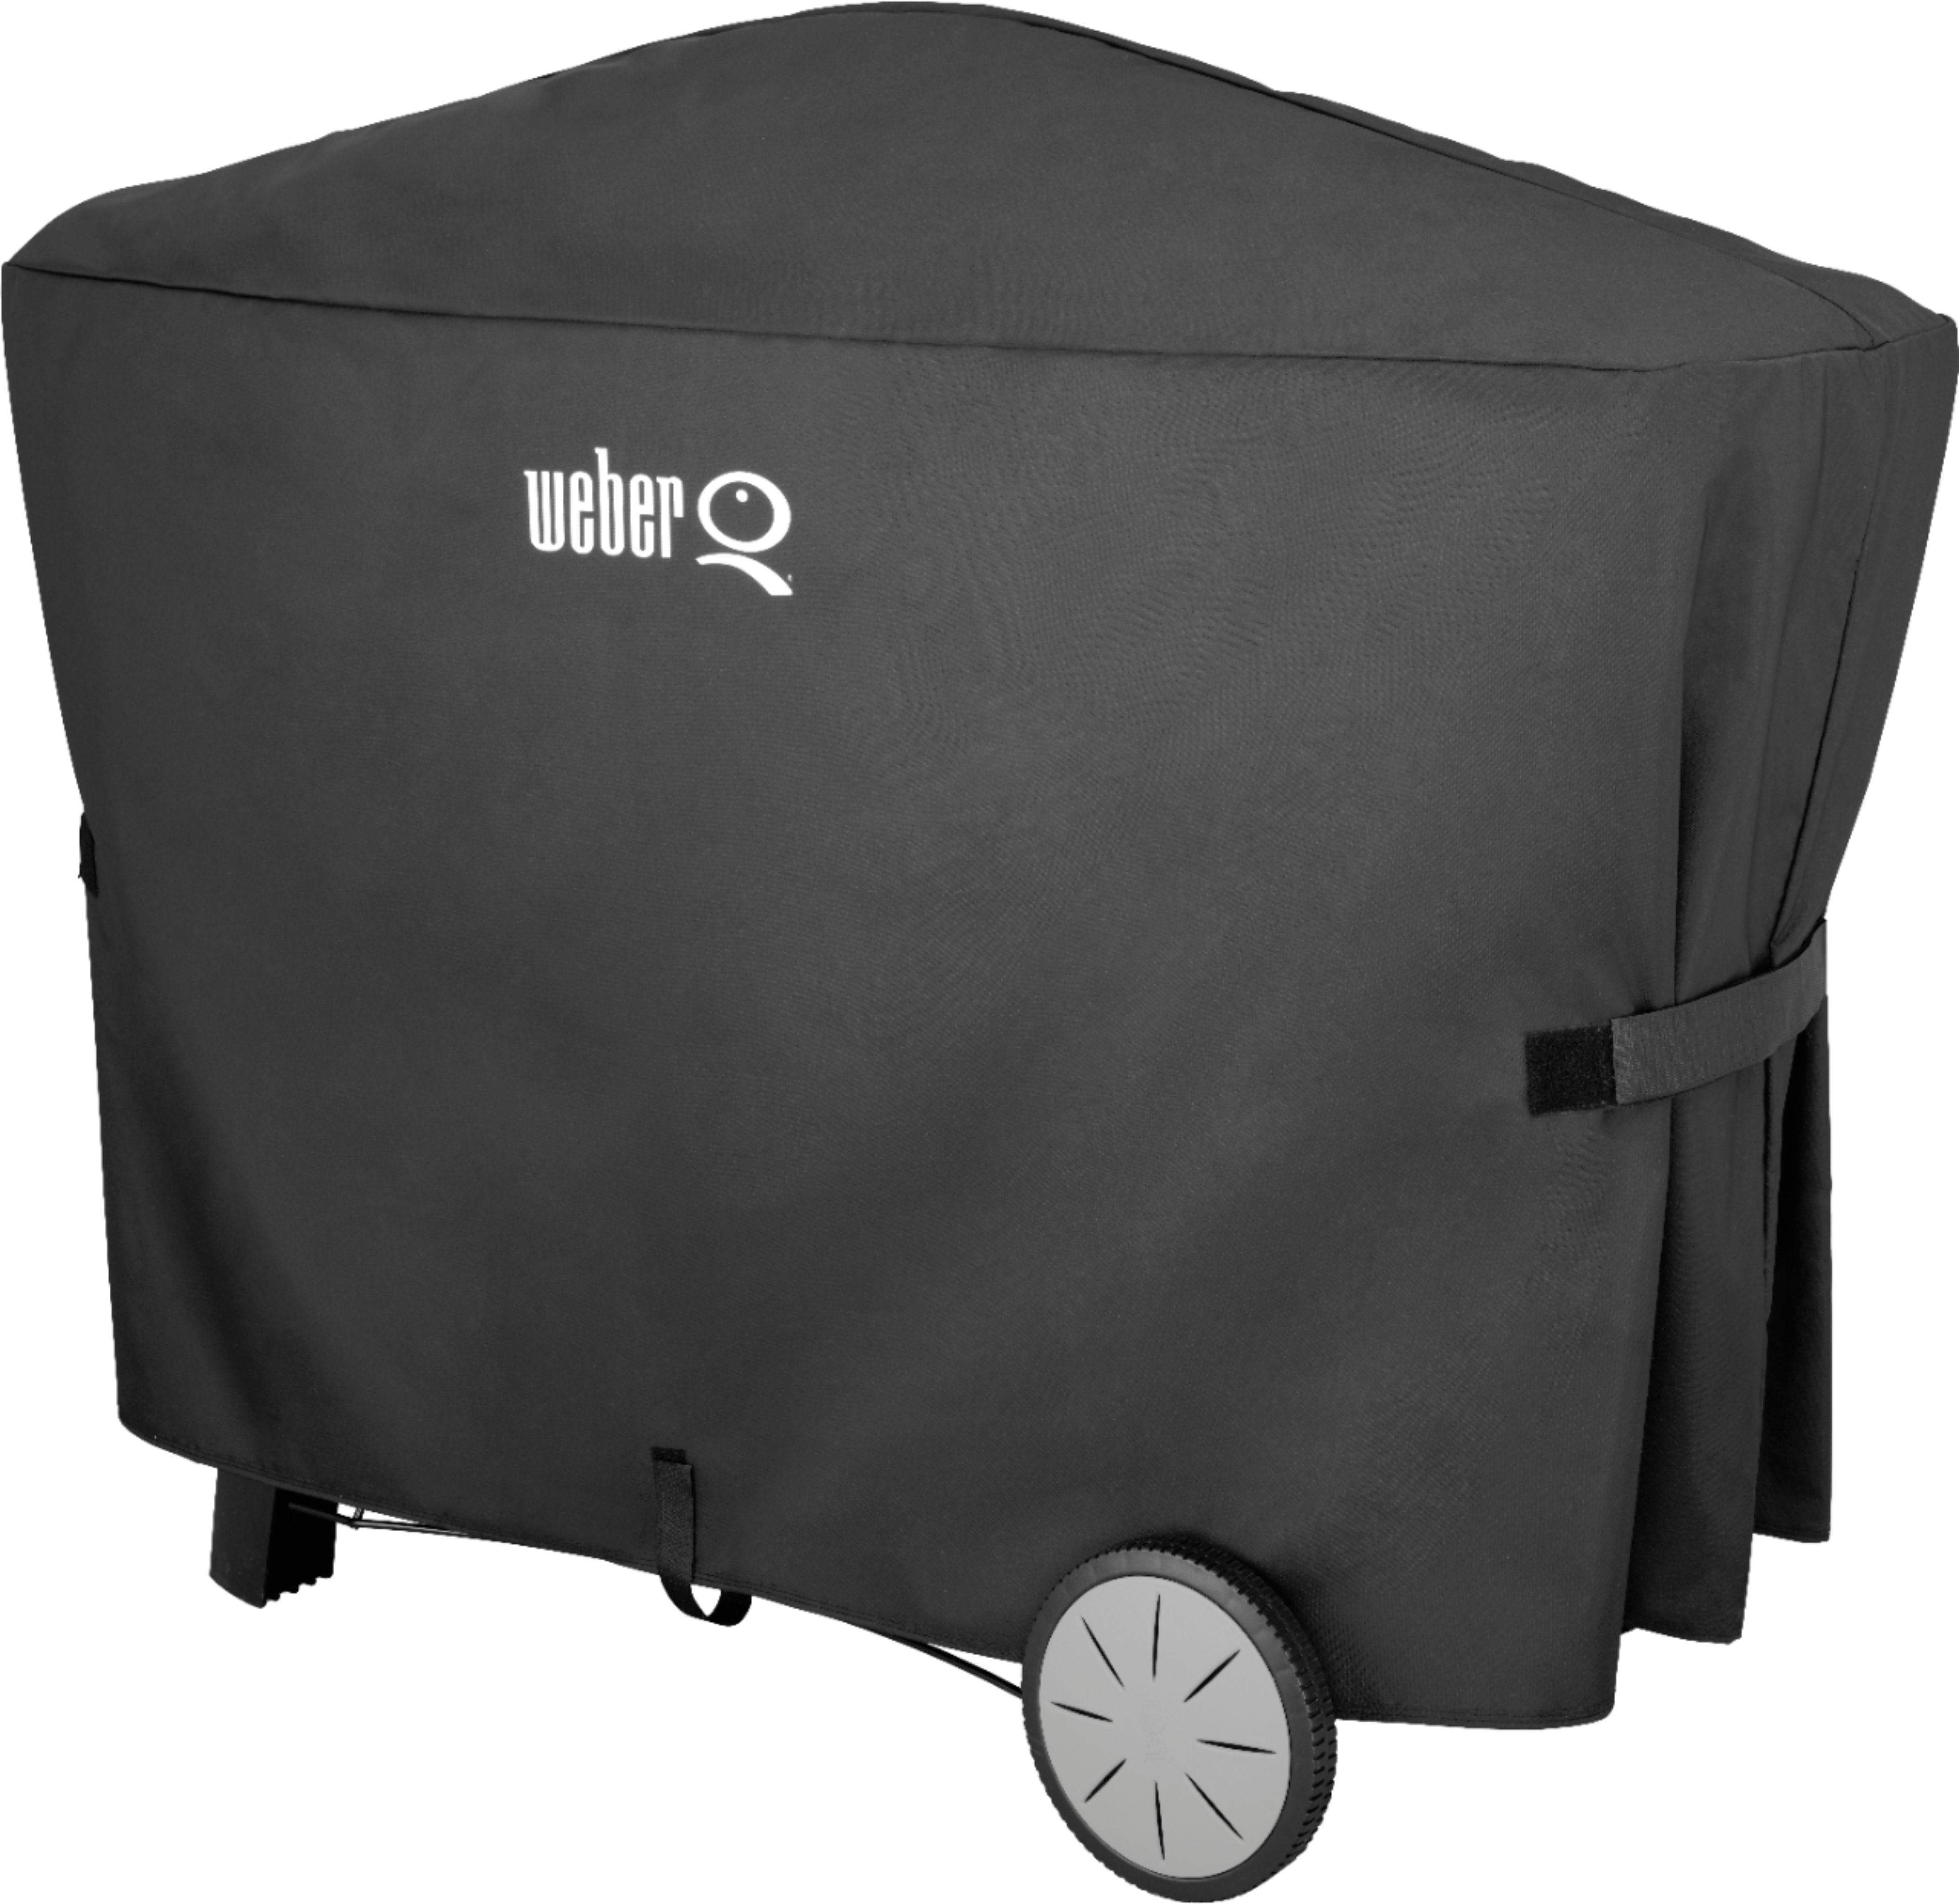 Angle View: Weber - Rolling Cart Grill Cover for Q 2000/3000 grills - Black